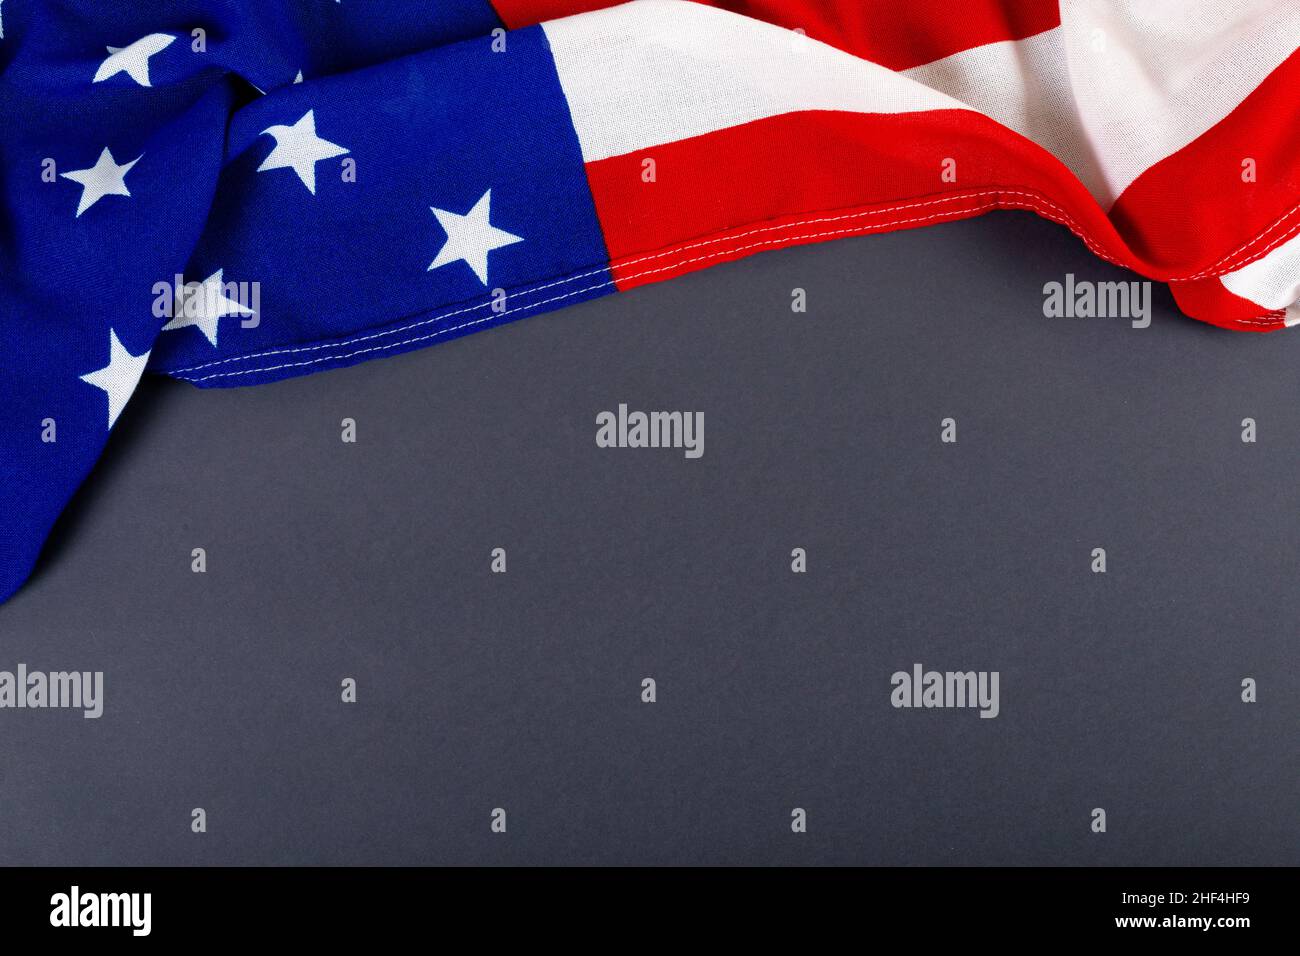 High angle view of america flag with stars and stripes pattern on black table with copy space Stock Photo